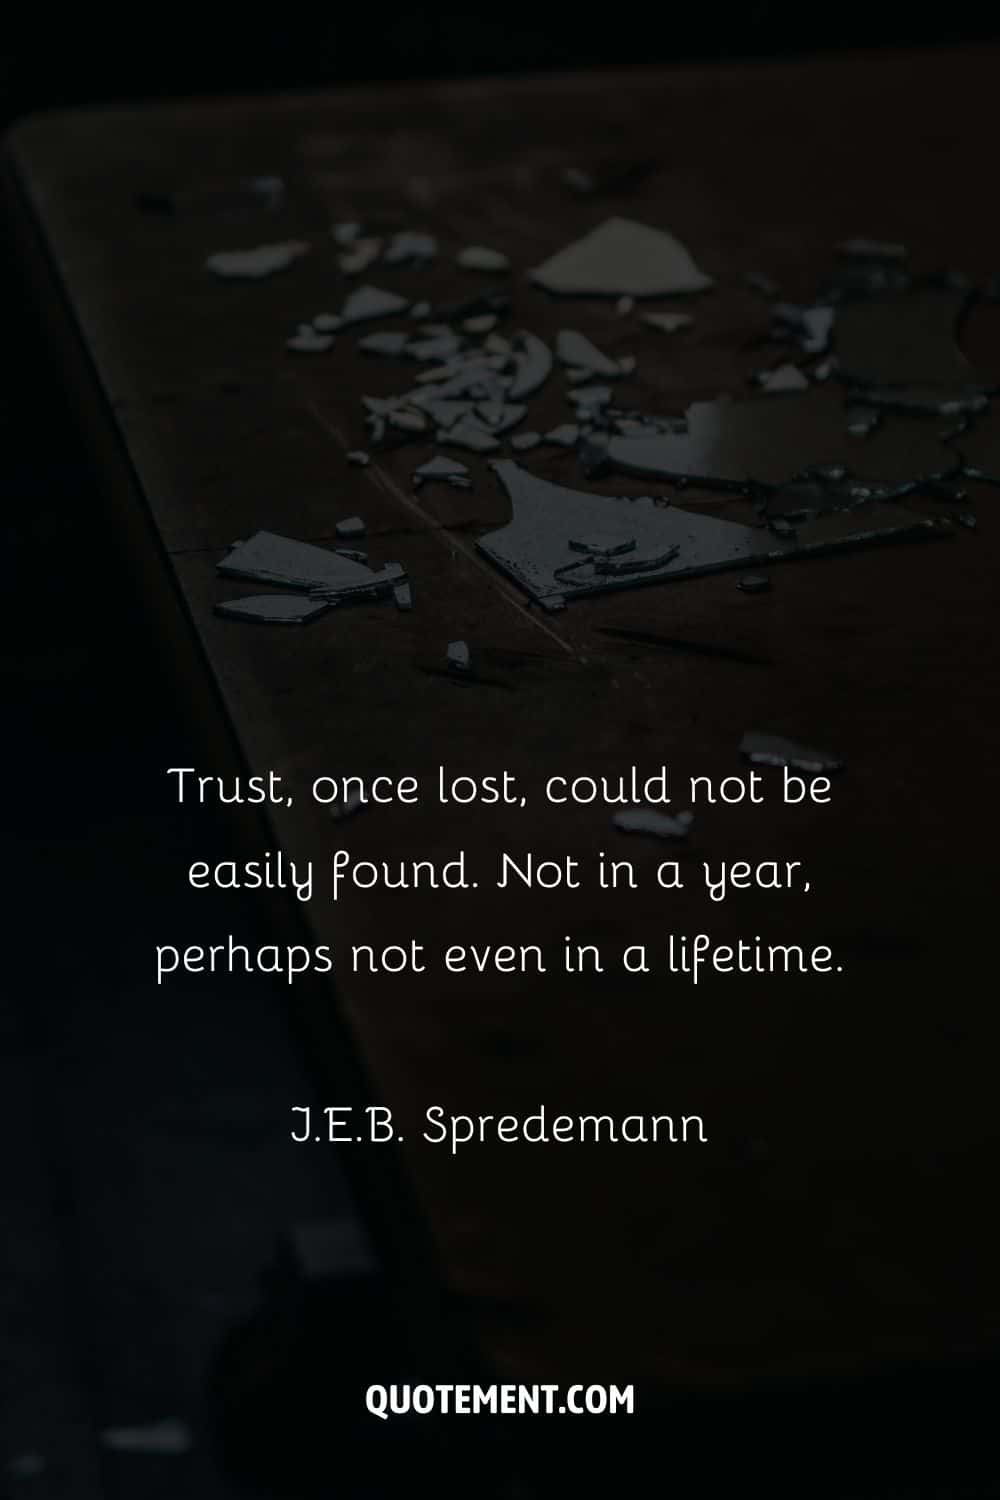 “Trust, once lost, could not be easily found. Not in a year, perhaps not even in a lifetime.” — J.E.B. Spredemann